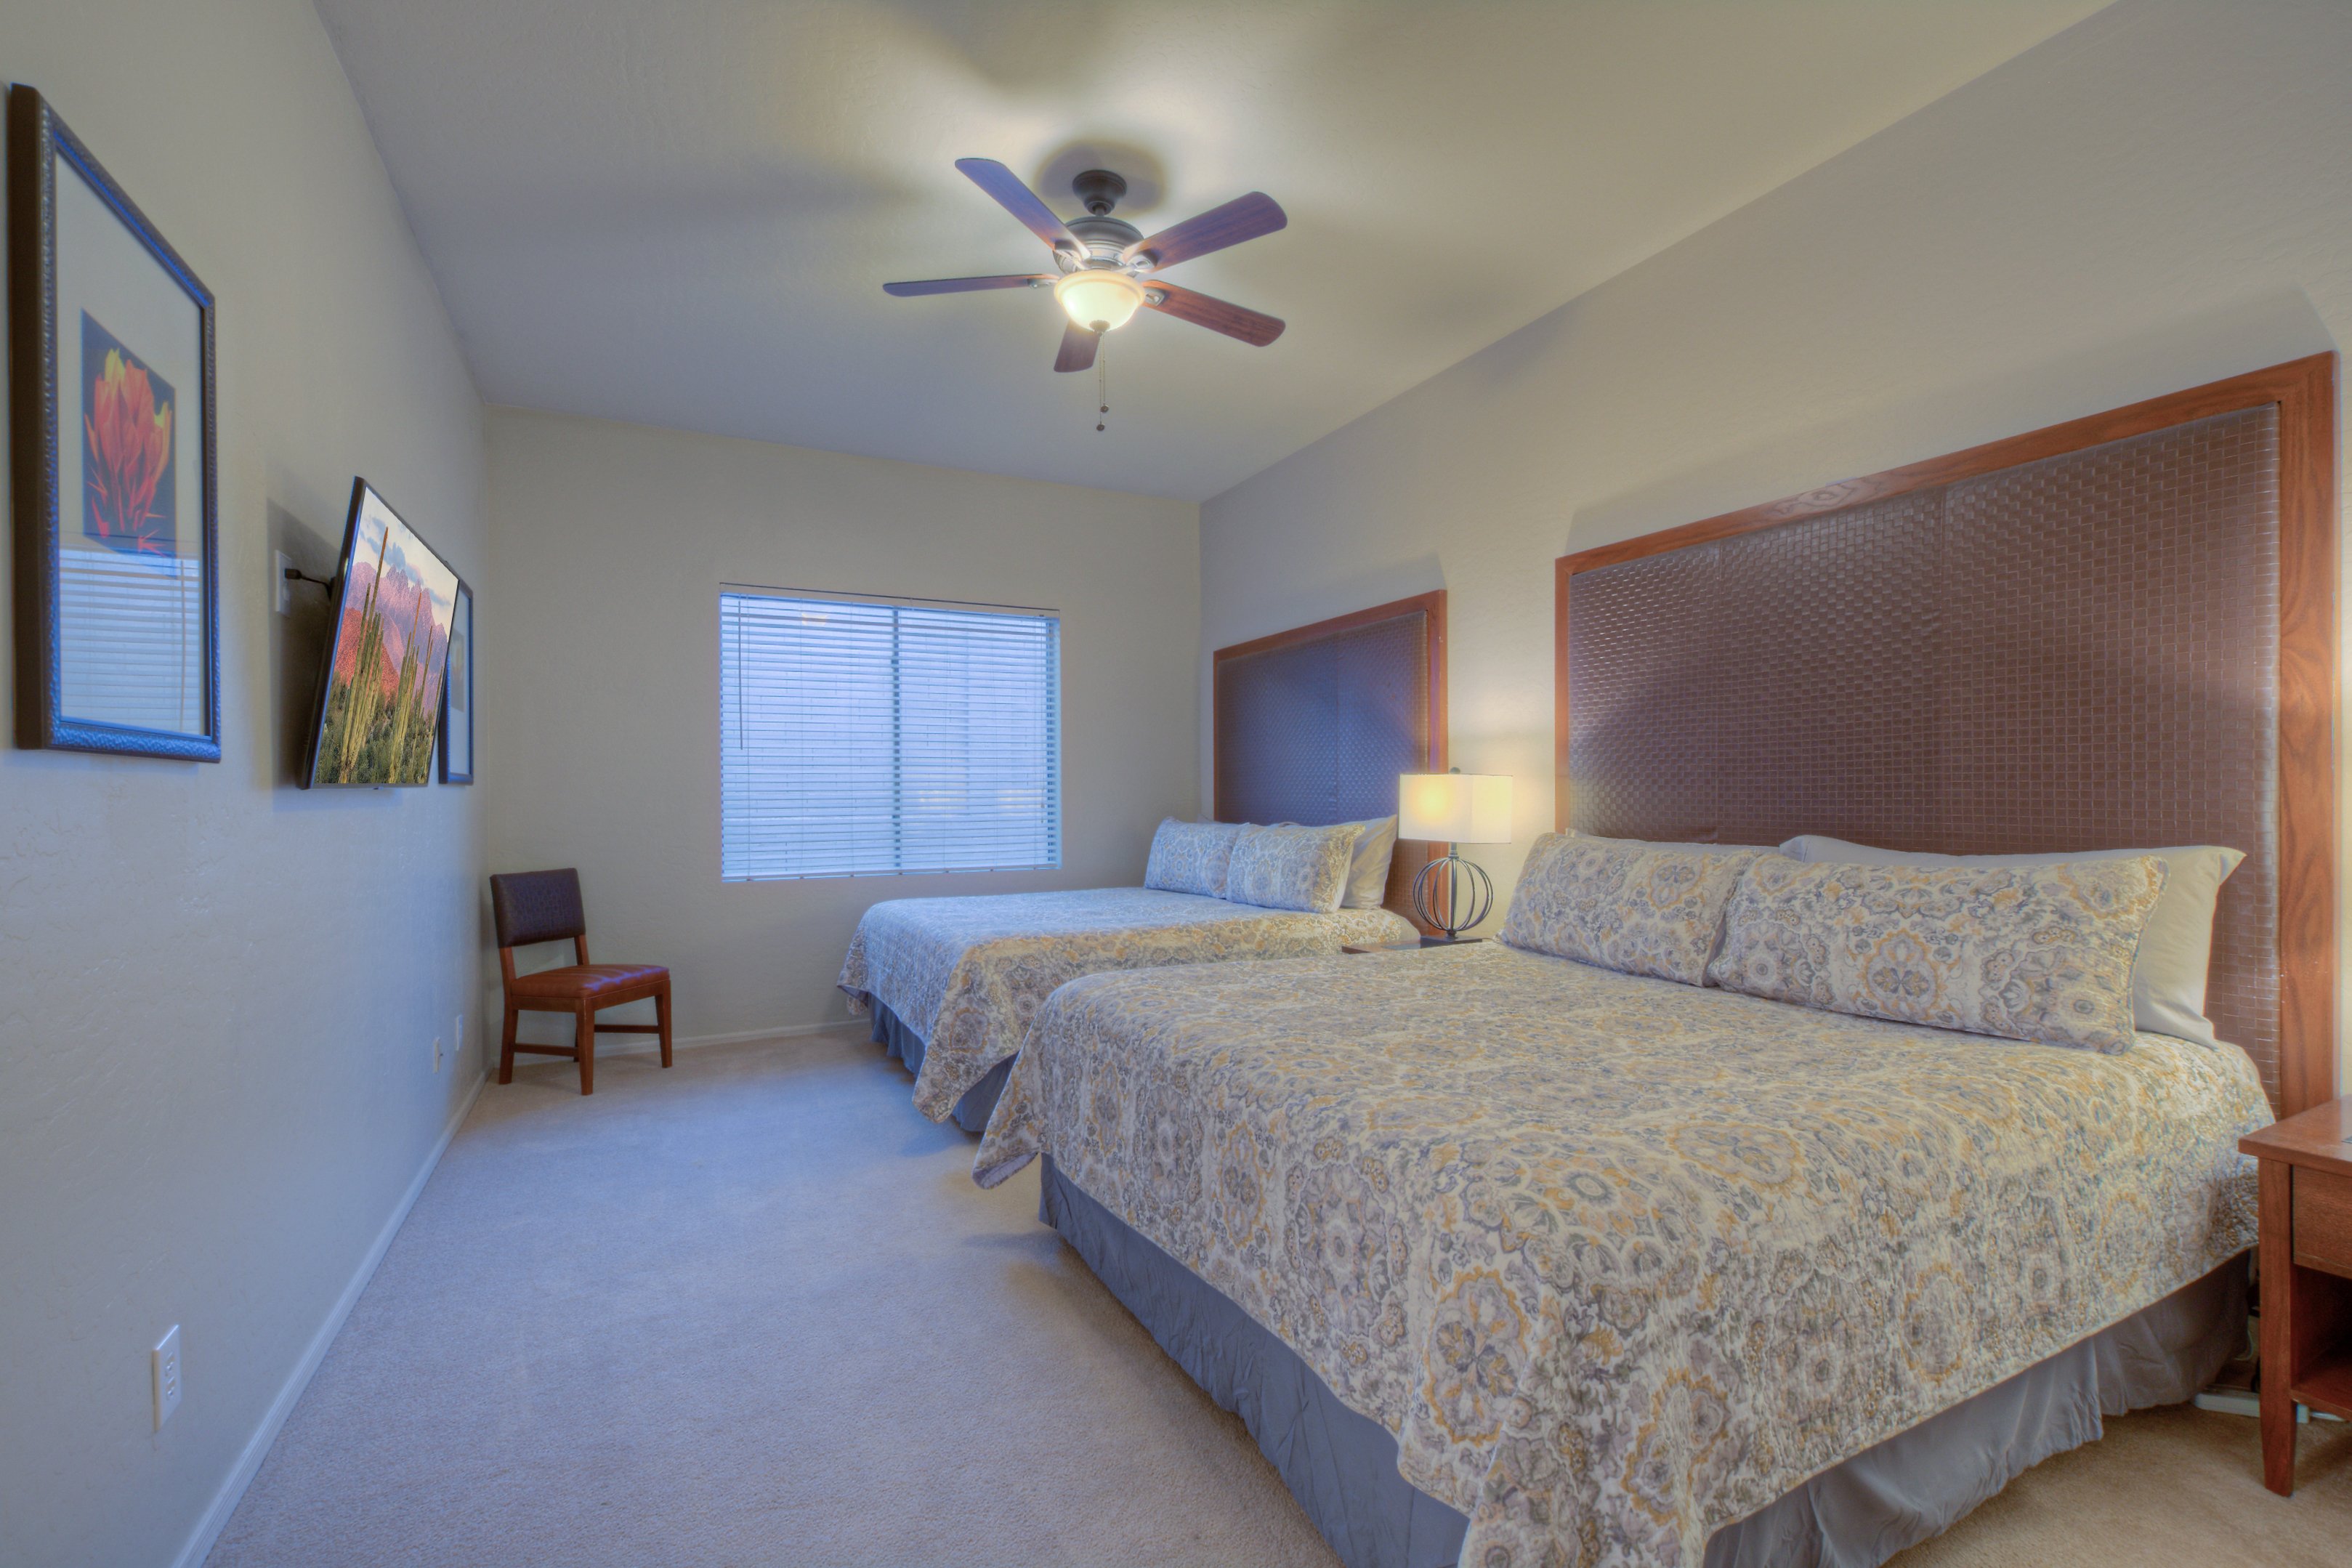 Fifth bedroom is on the ground floor and has 2 king beds, a ceiling fan and TV.